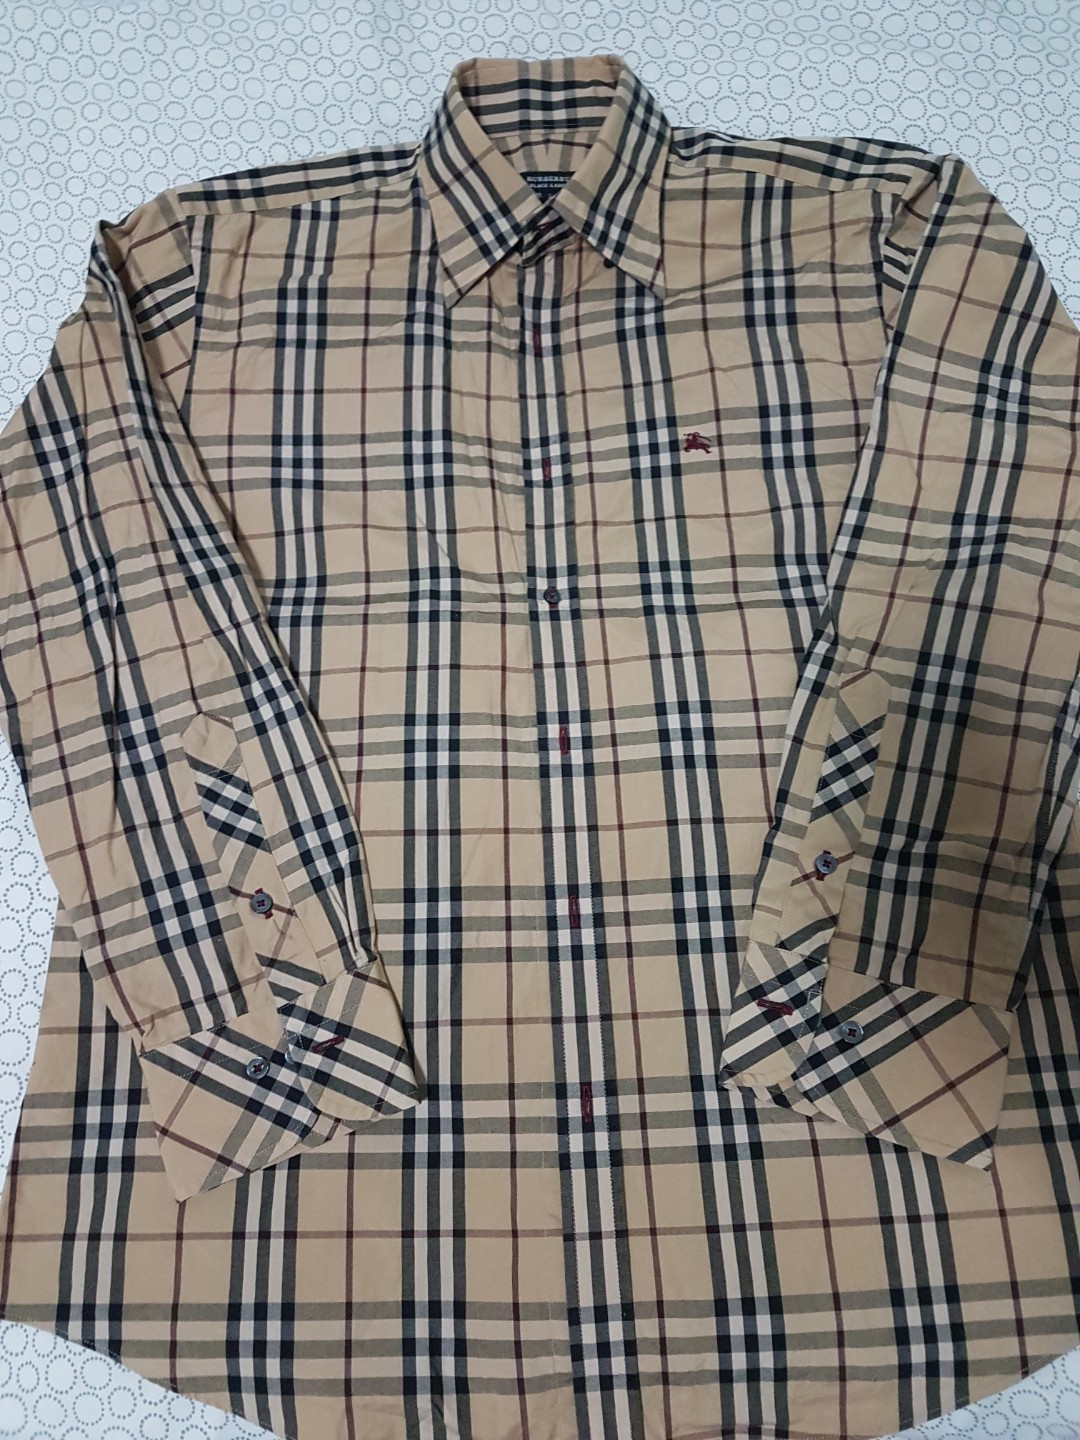 Burberry Black Label Button Up Shirt Men S Fashion Clothes Tops On Carousell